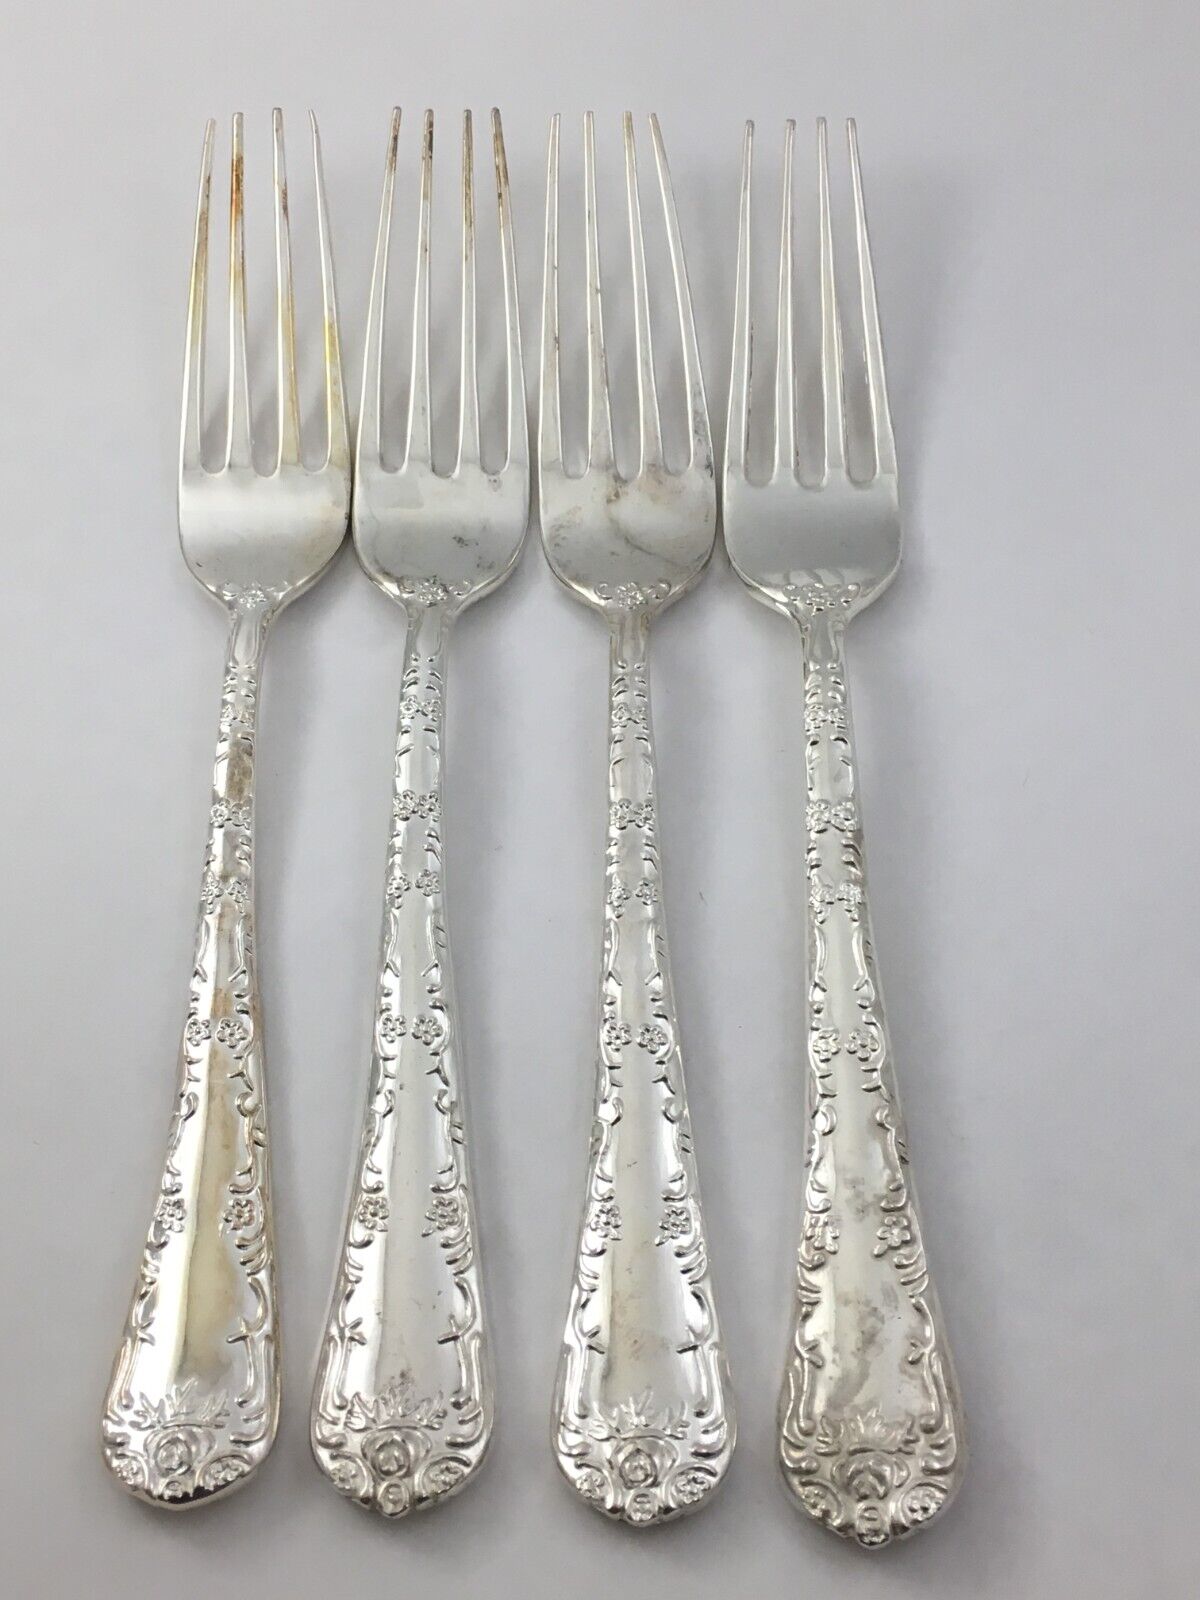 WM. Rogers & Son China Enchanted Rose International Silverplate 4 Dinner Forks